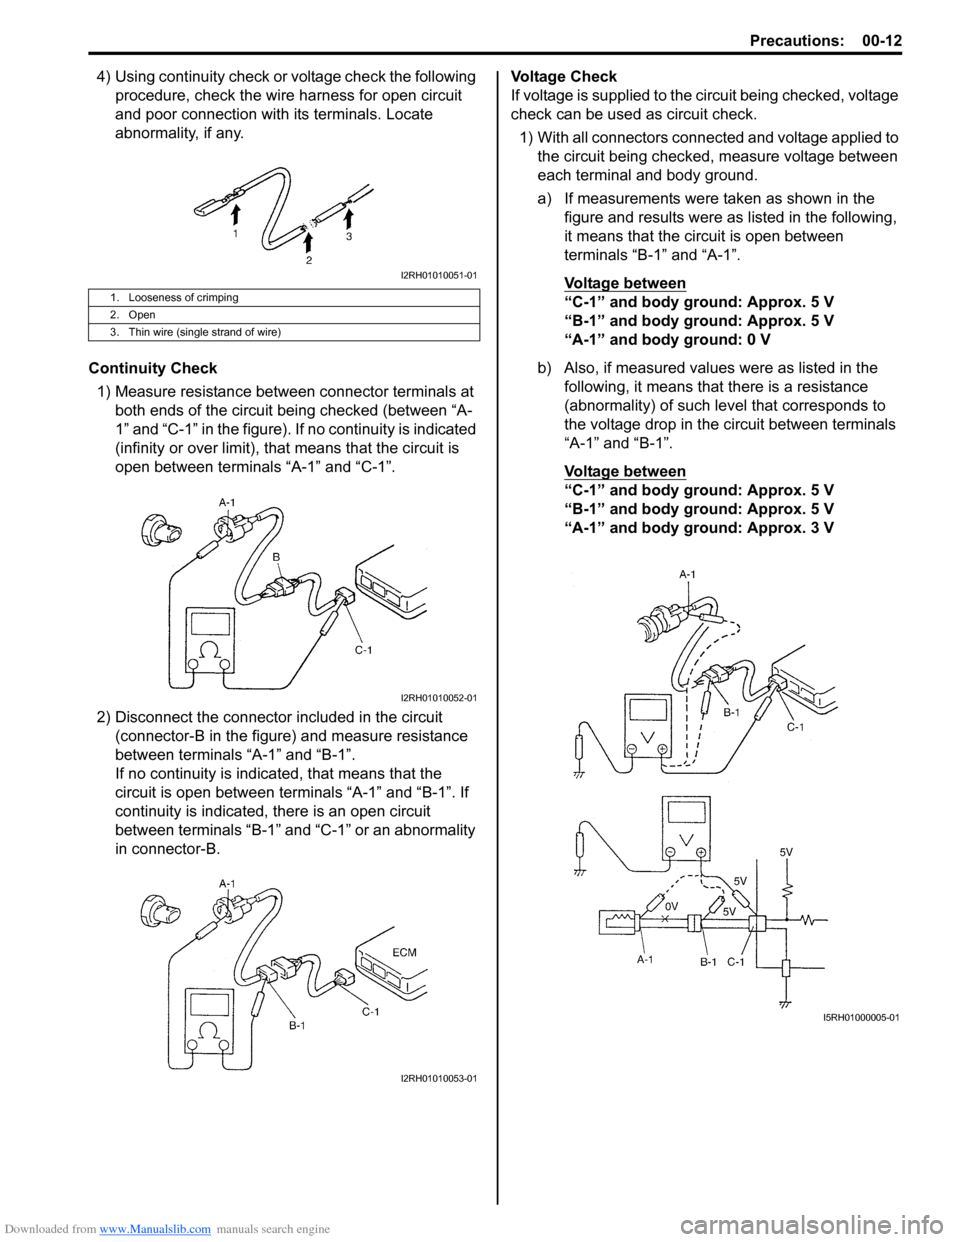 SUZUKI SWIFT 2006 2.G Service User Guide Downloaded from www.Manualslib.com manuals search engine Precautions: 00-12
4) Using continuity check or voltage check the following procedure, check the wire harness for open circuit 
and poor connec